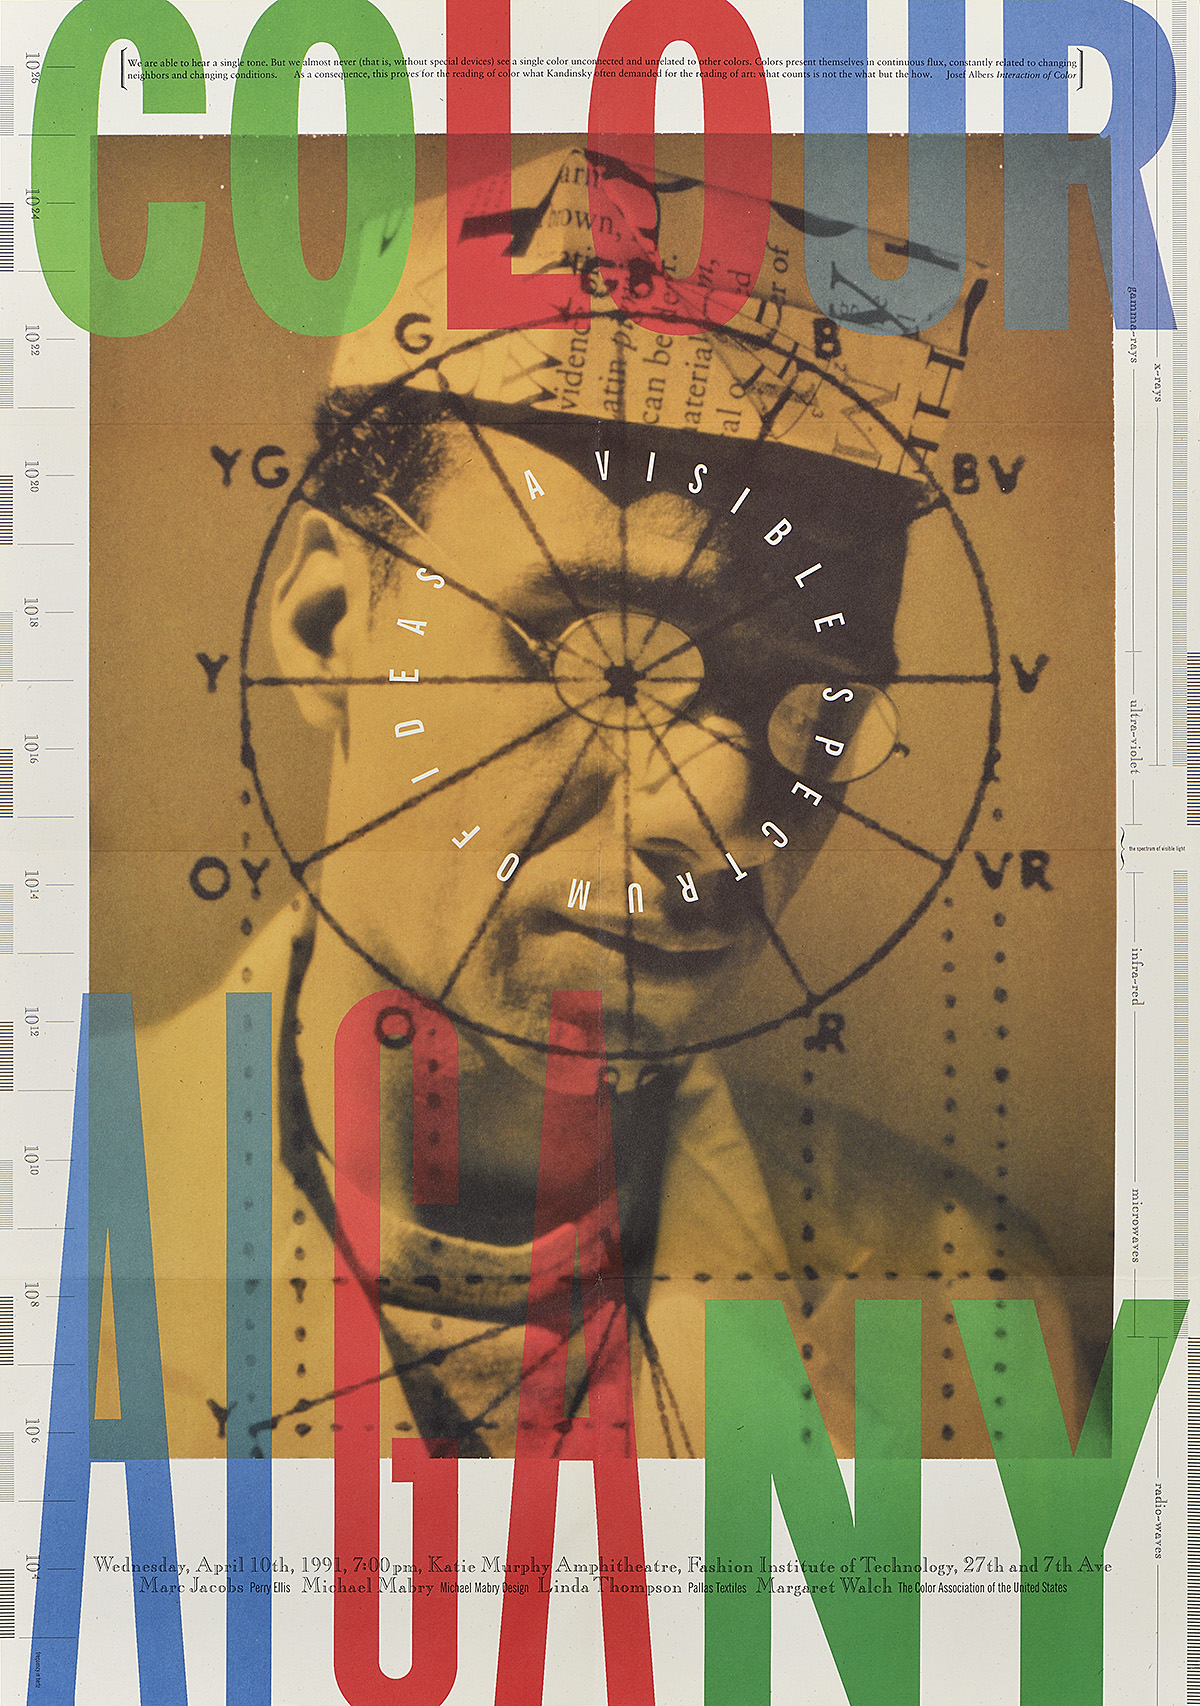 A sepia toned photographic poster of a man's head superimposed by a drawing of a color wheel.